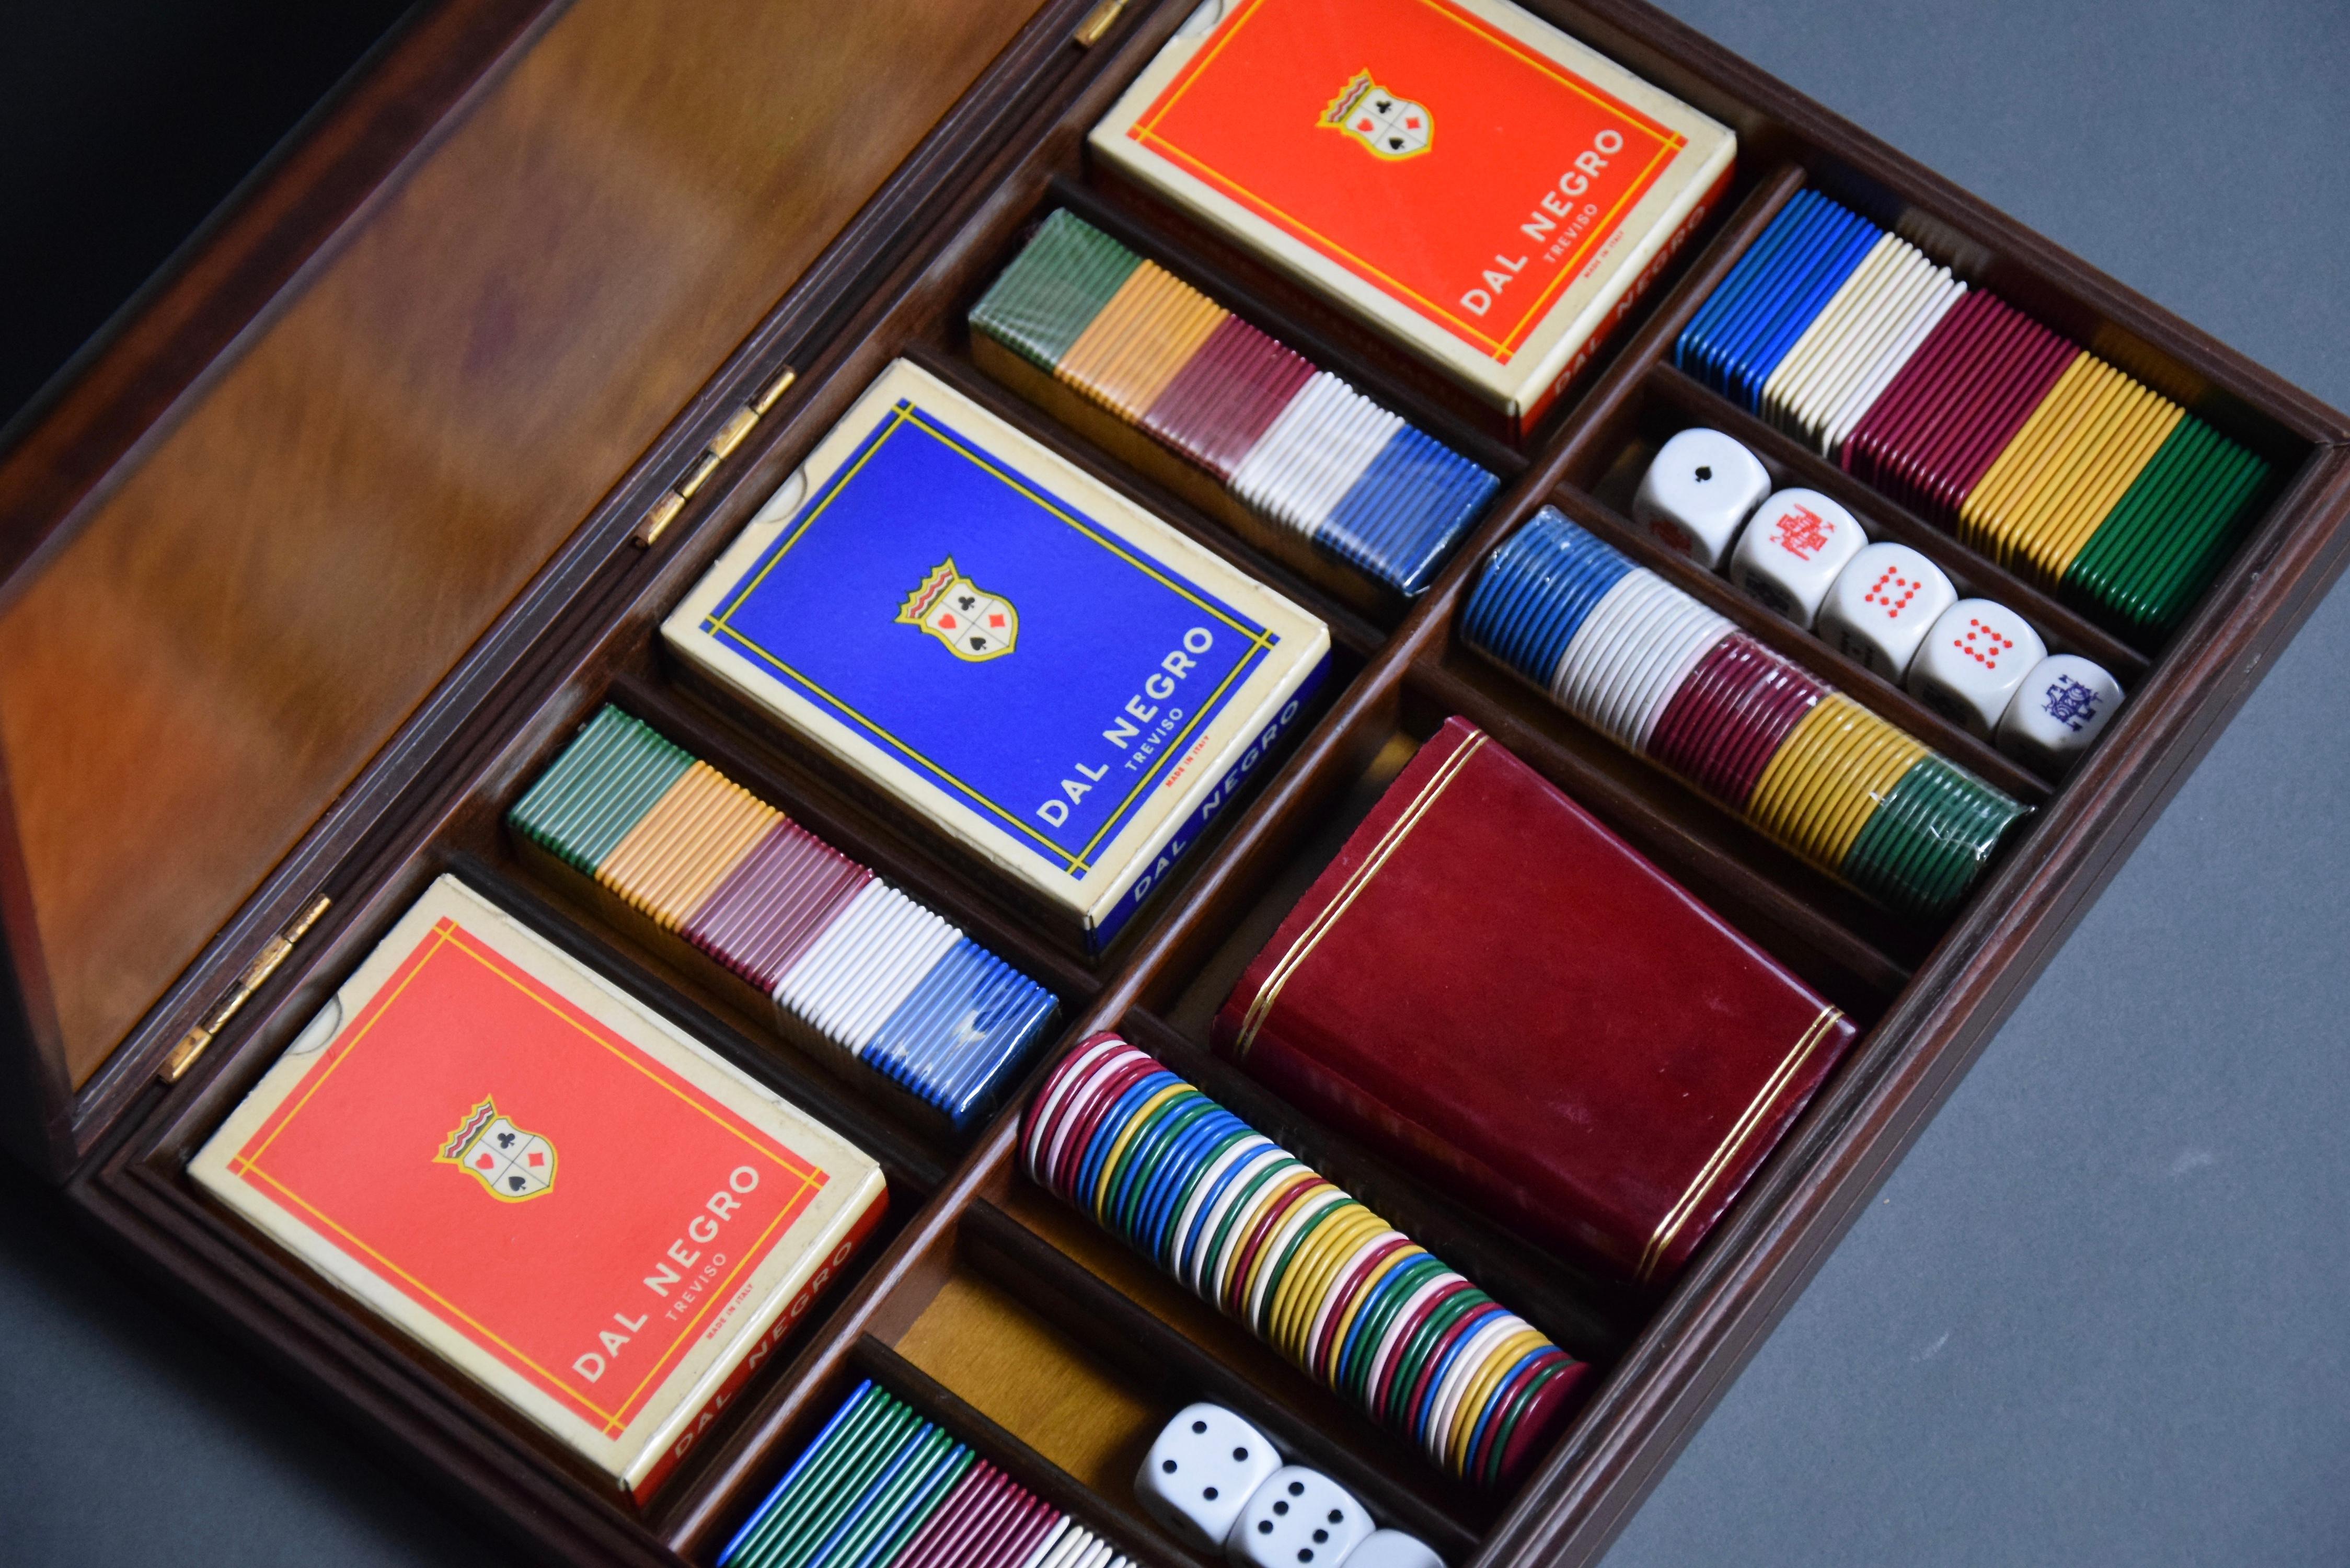 The Italian Mid-Century Modern wood and 925 Silver poker & bridge Game Box by Ottaviani Italy is a stunning piece of craftsmanship that will elevate any gaming experience. The sleek and elegant design is inspired by the iconic mid-century modern